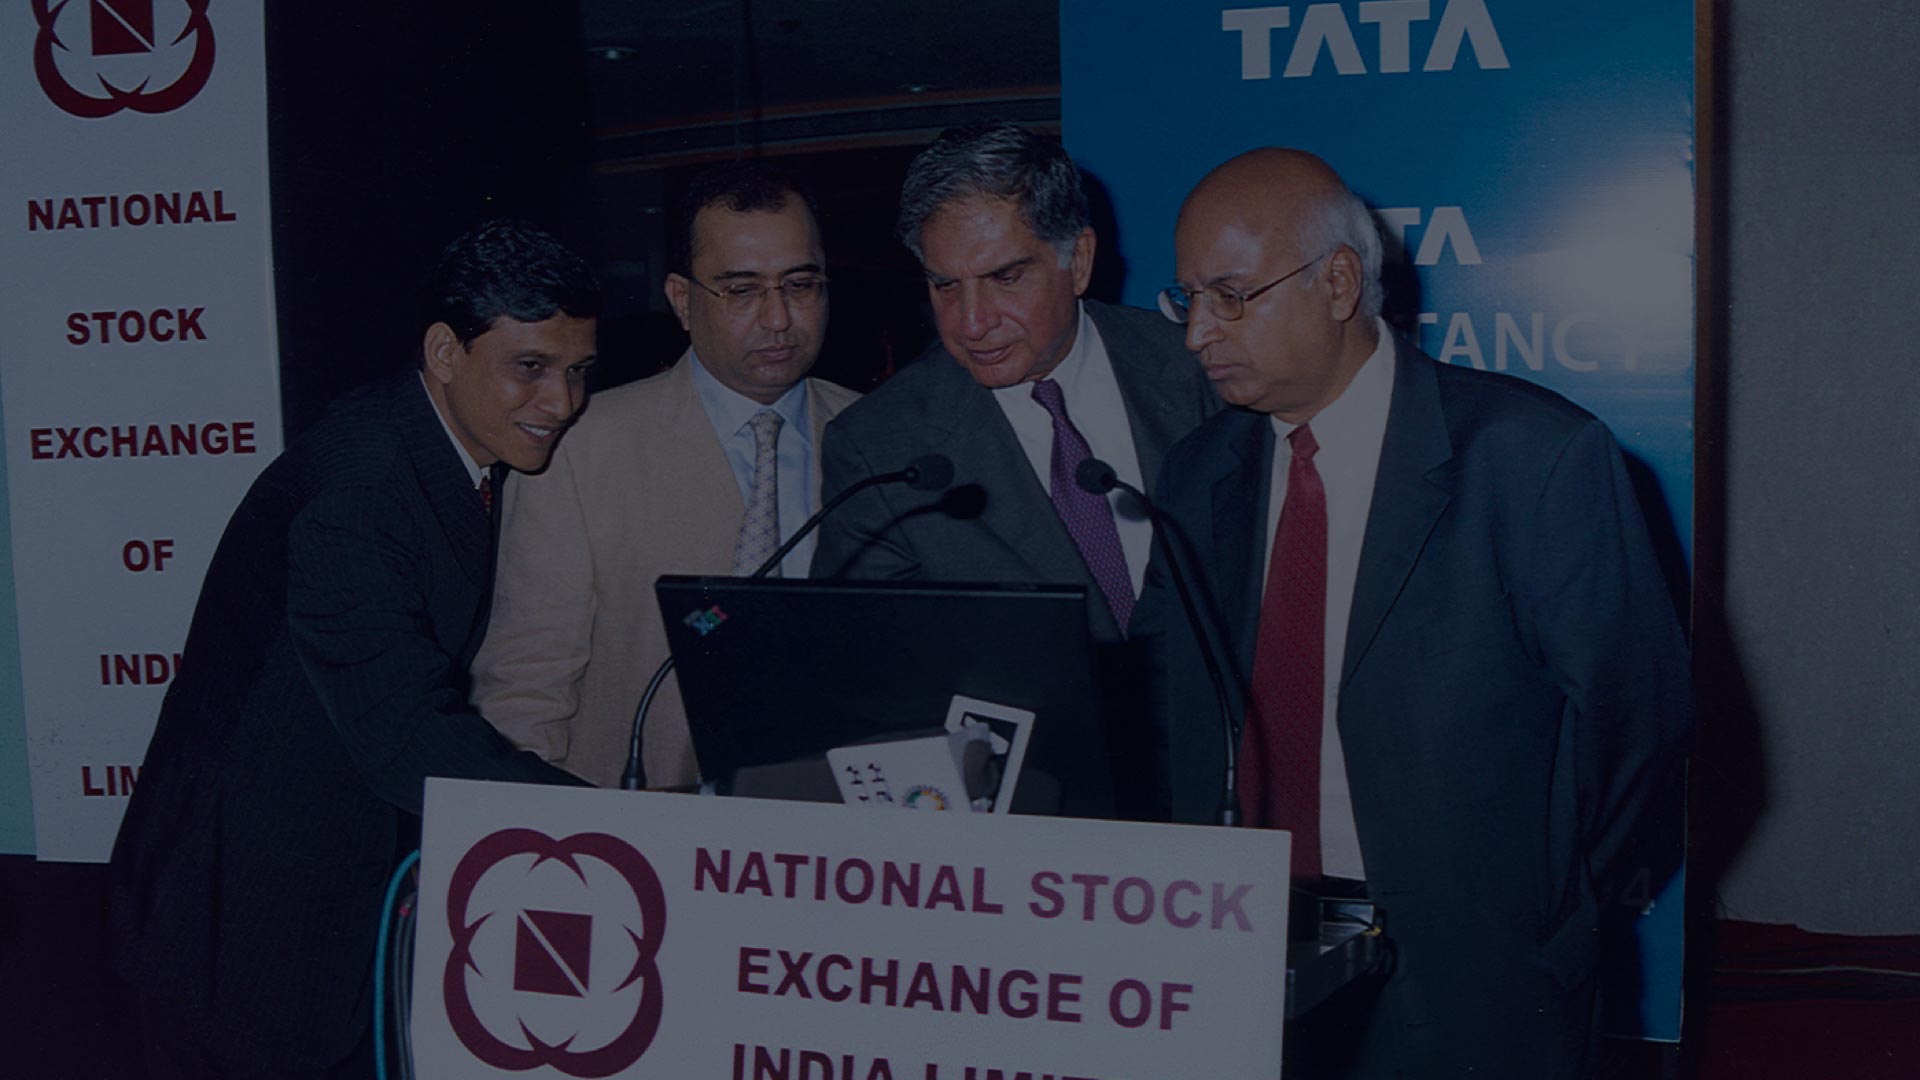 TCS's IPO was the largest in India